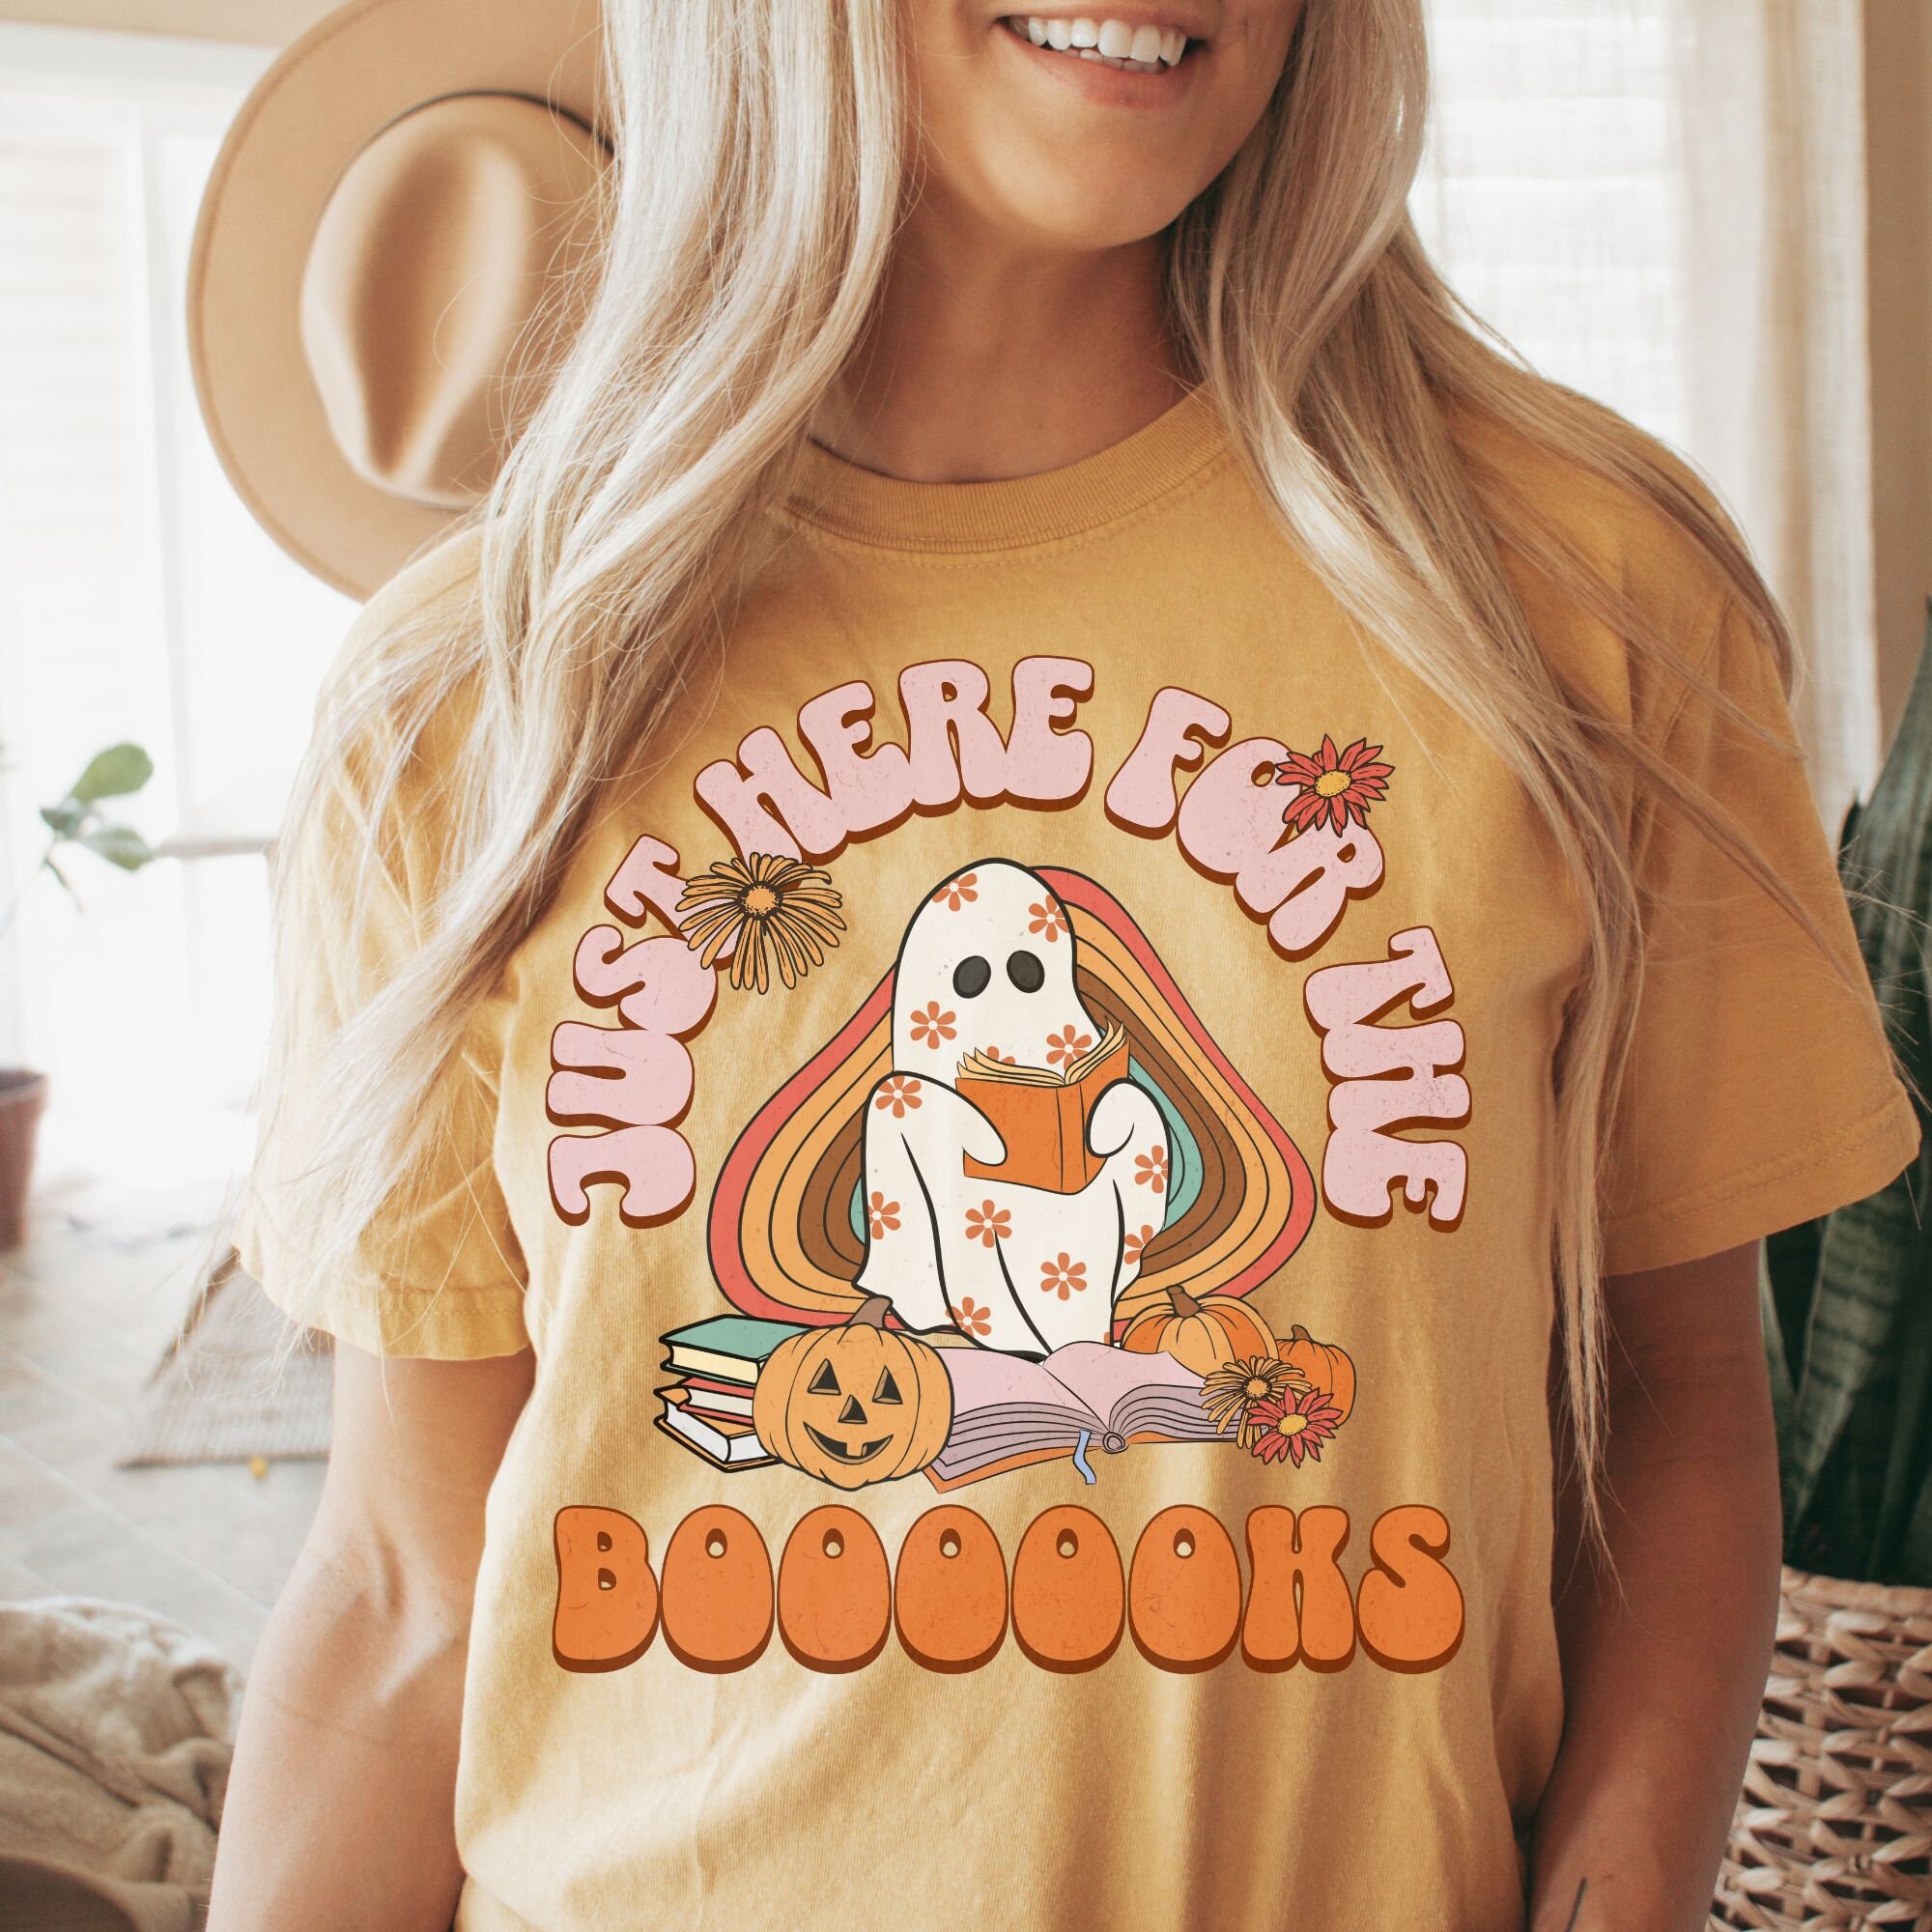 Discover Teacher Halloween Shirt, Just Here For the Booooks Floral Ghost Tee, Read More Books T-Shirt, Book Lovers Gift, Librarian Halloween Shirt